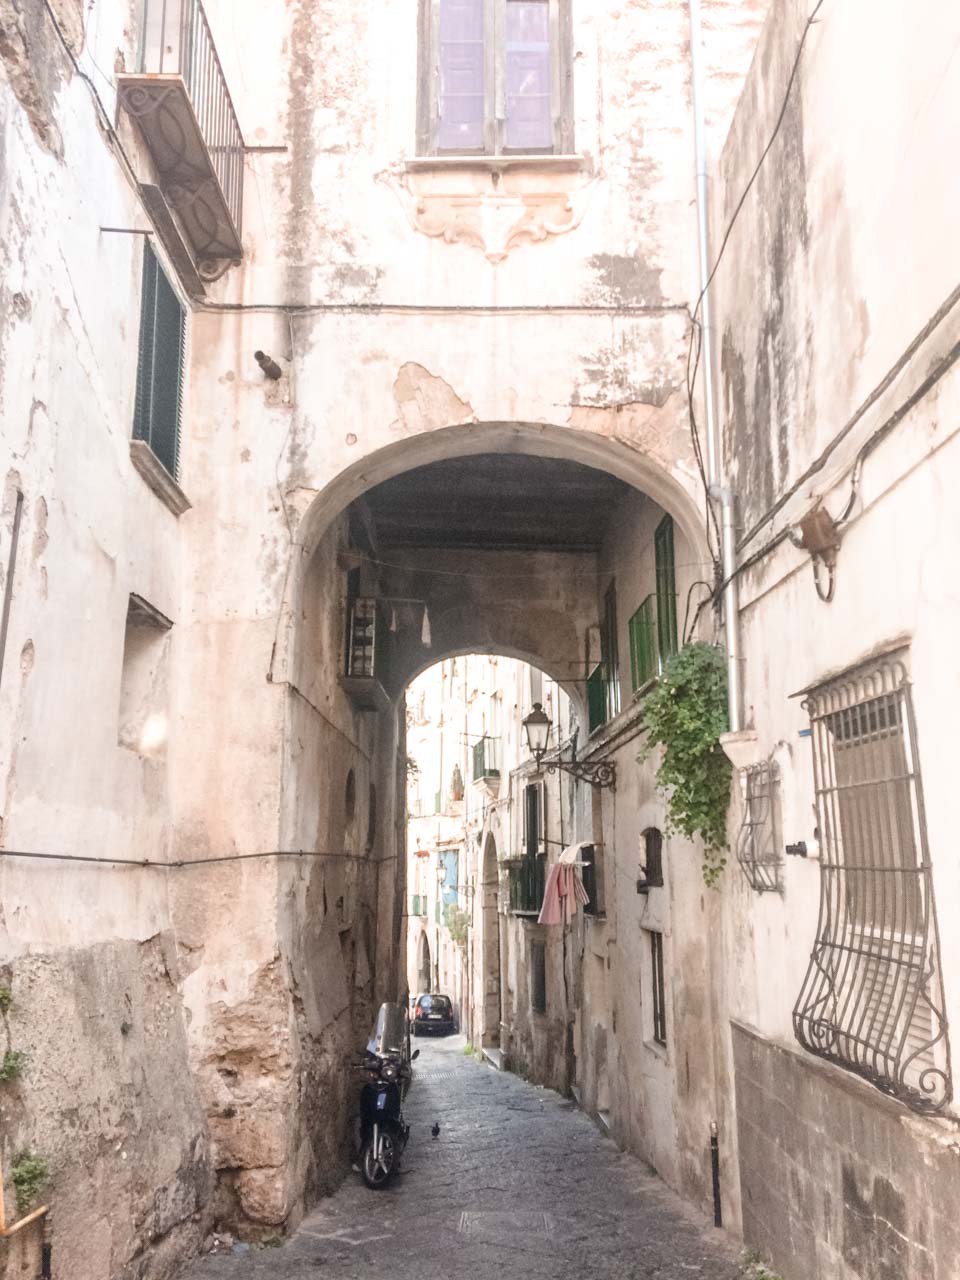 An alley in Salerno, Italy